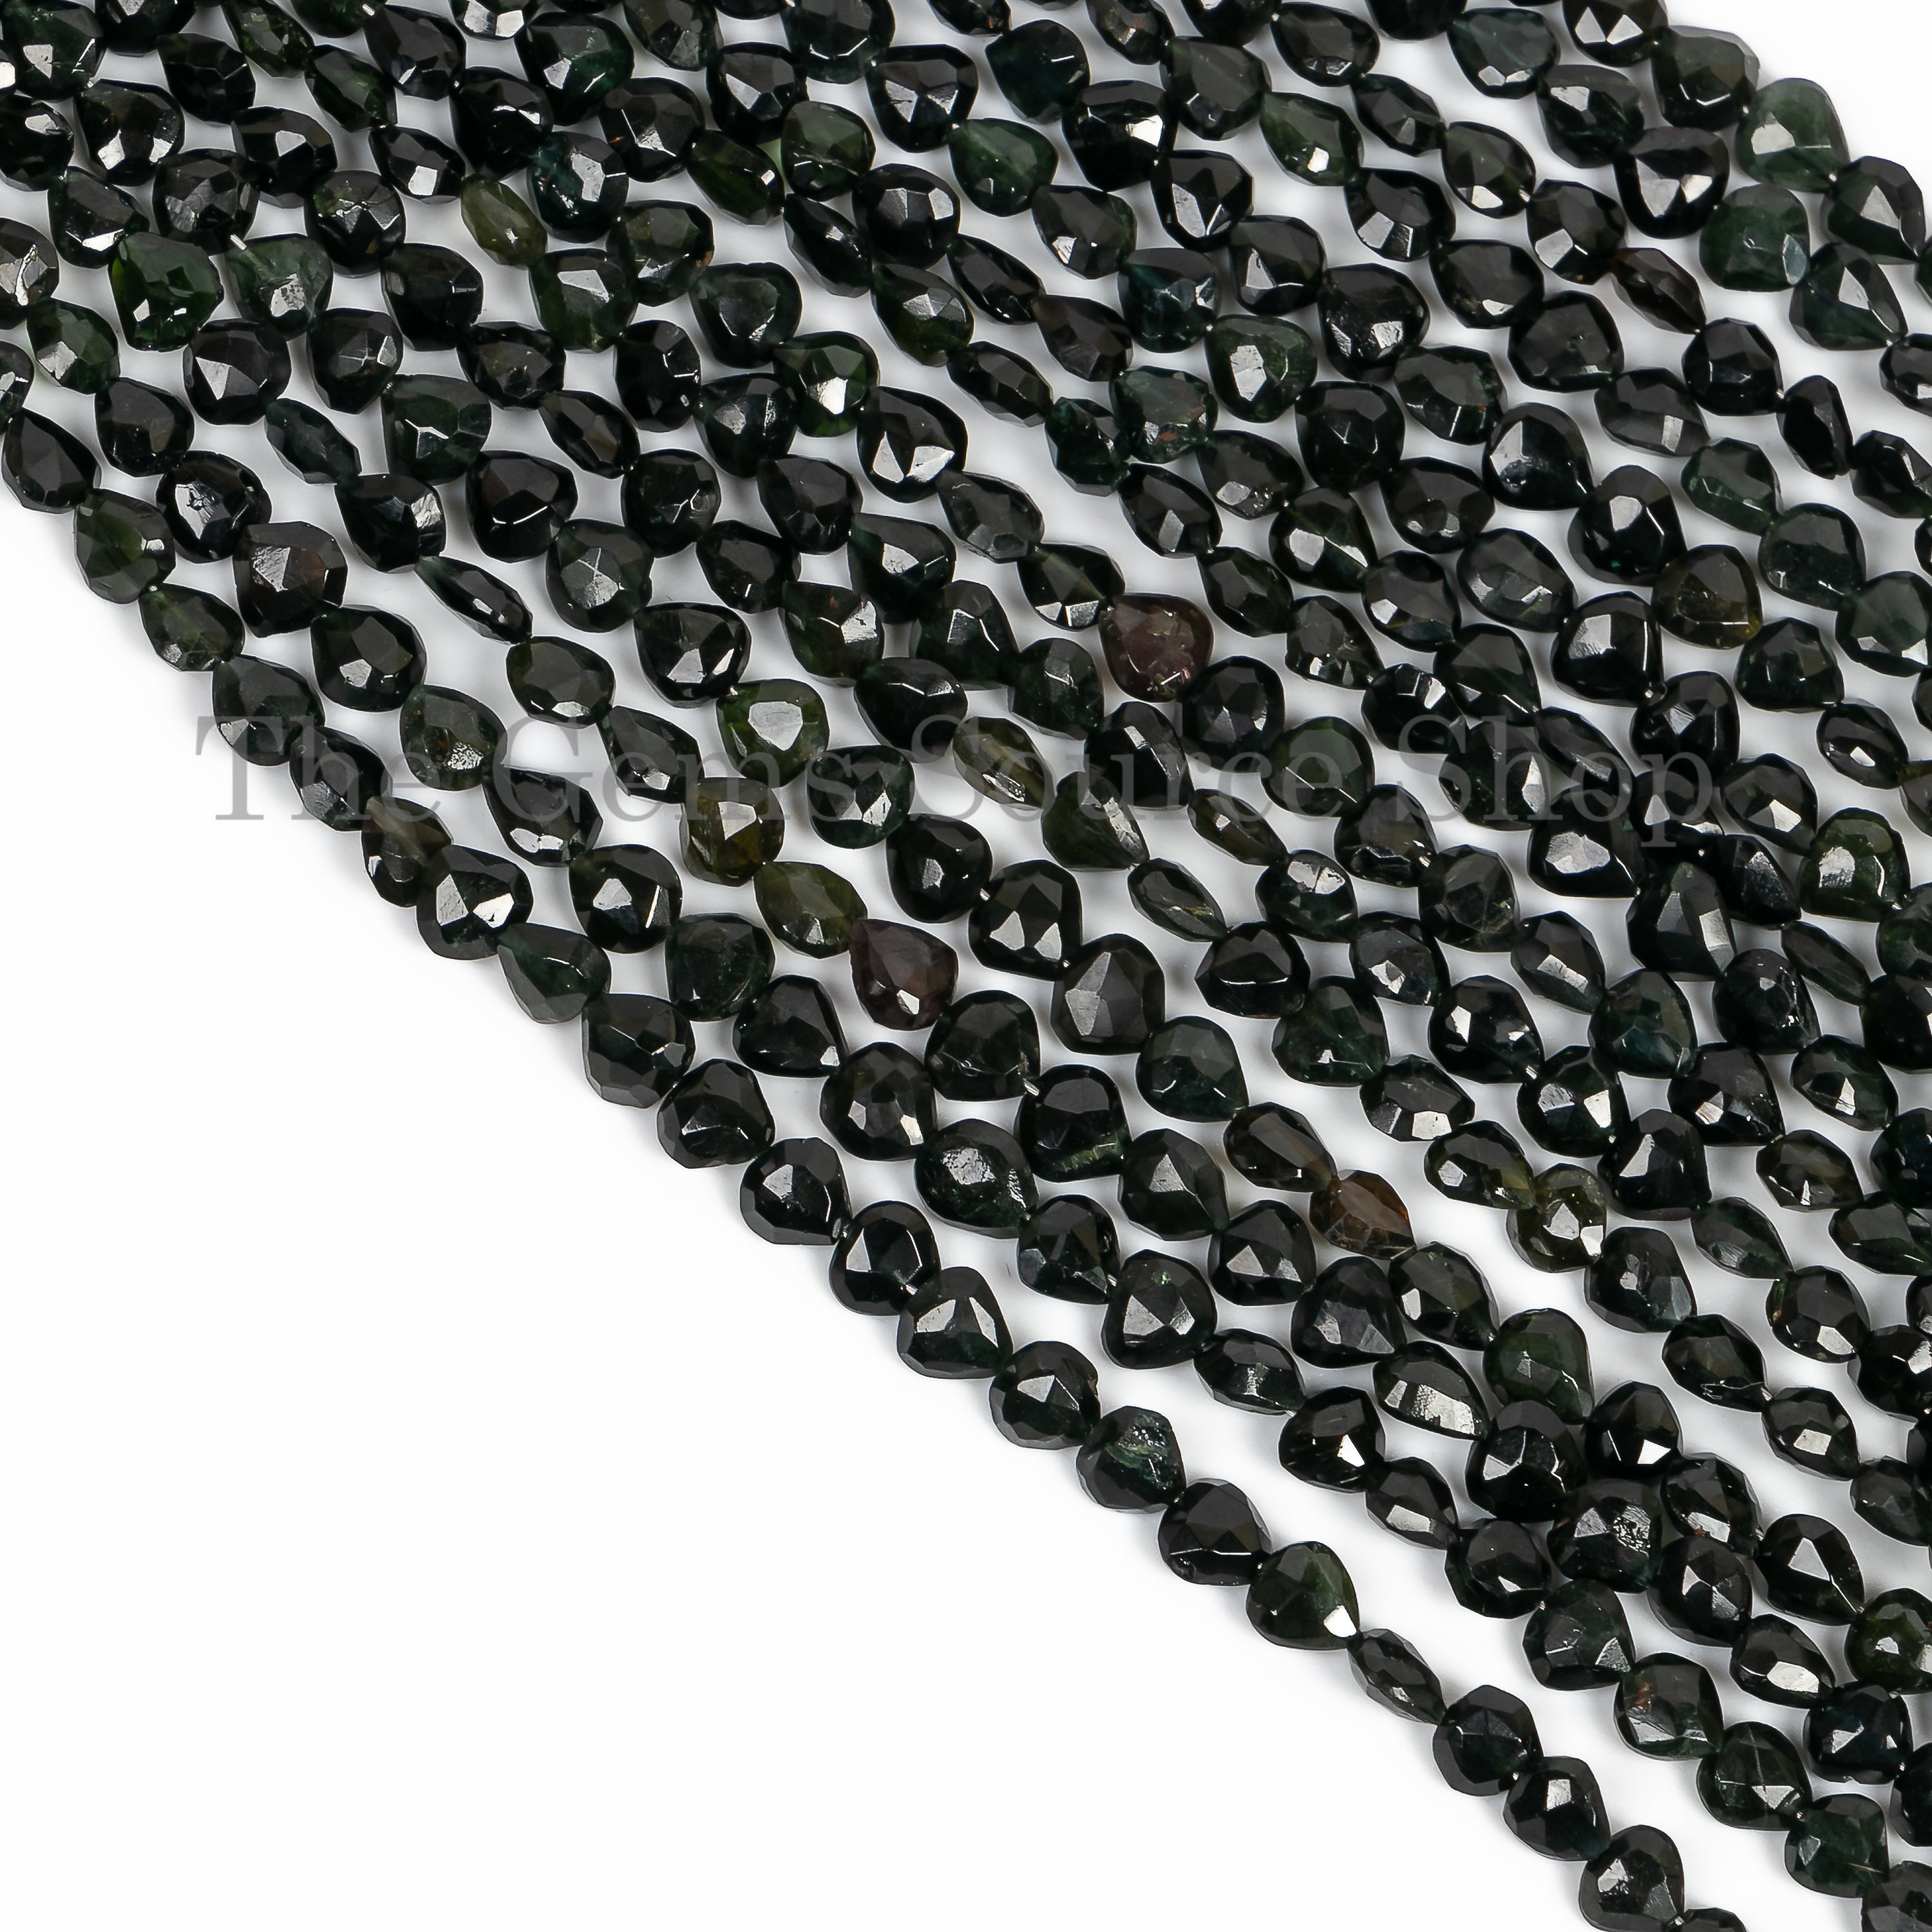 Black Tourmaline Faceted Heart Briolette, Tourmaline Heart Beads, Black Tourmaline Gemstone, Wholesale Beads, Jewelry Making Beads